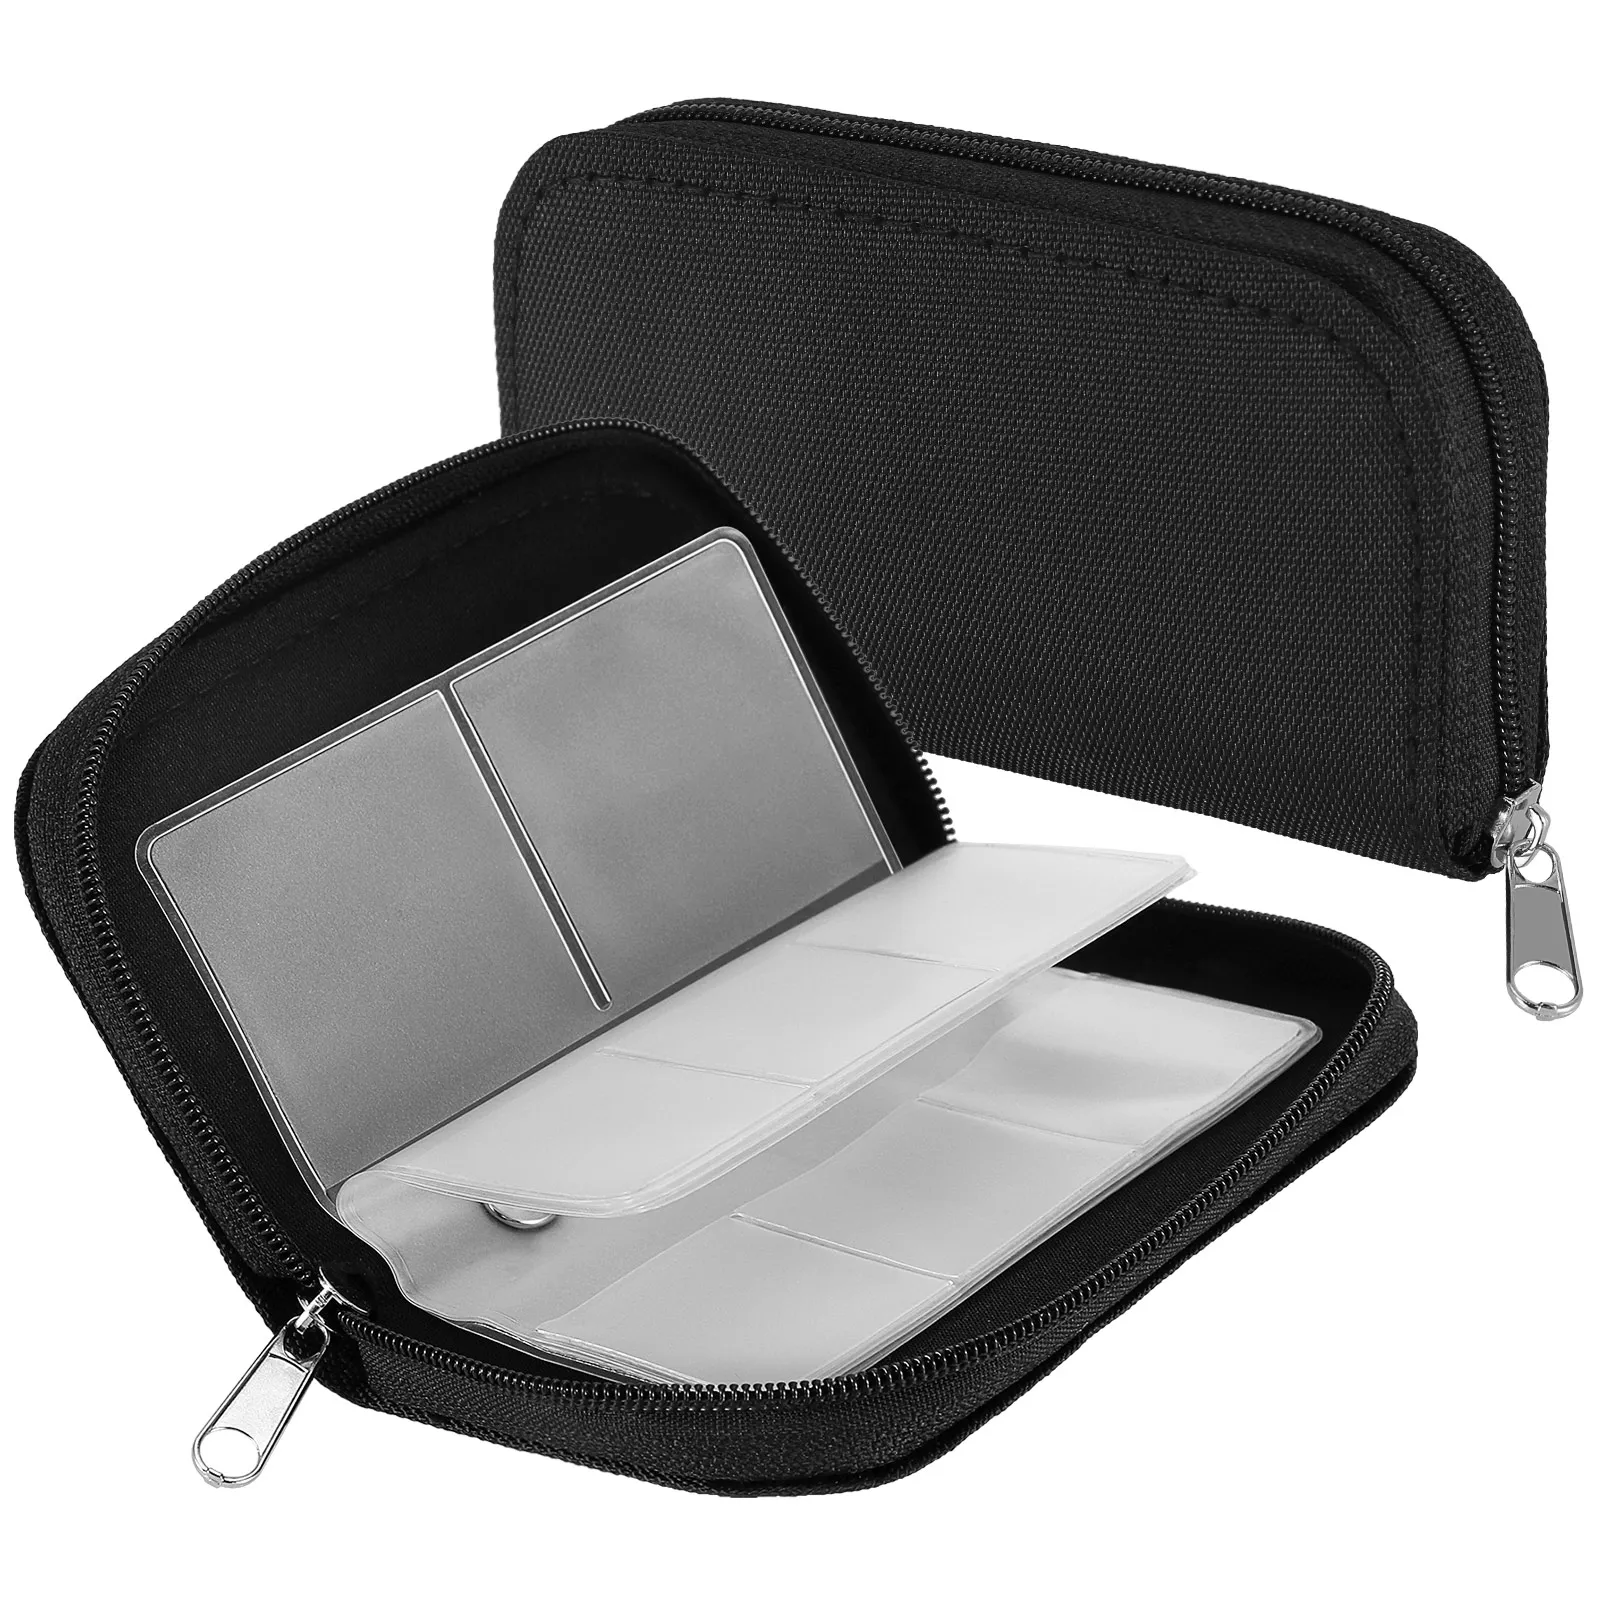 New Hot Fashion Memory Card Storage Carrying Pouch Case Holder Wallet for SD SDHC MMC MicroSD Mini Card Storage Bags